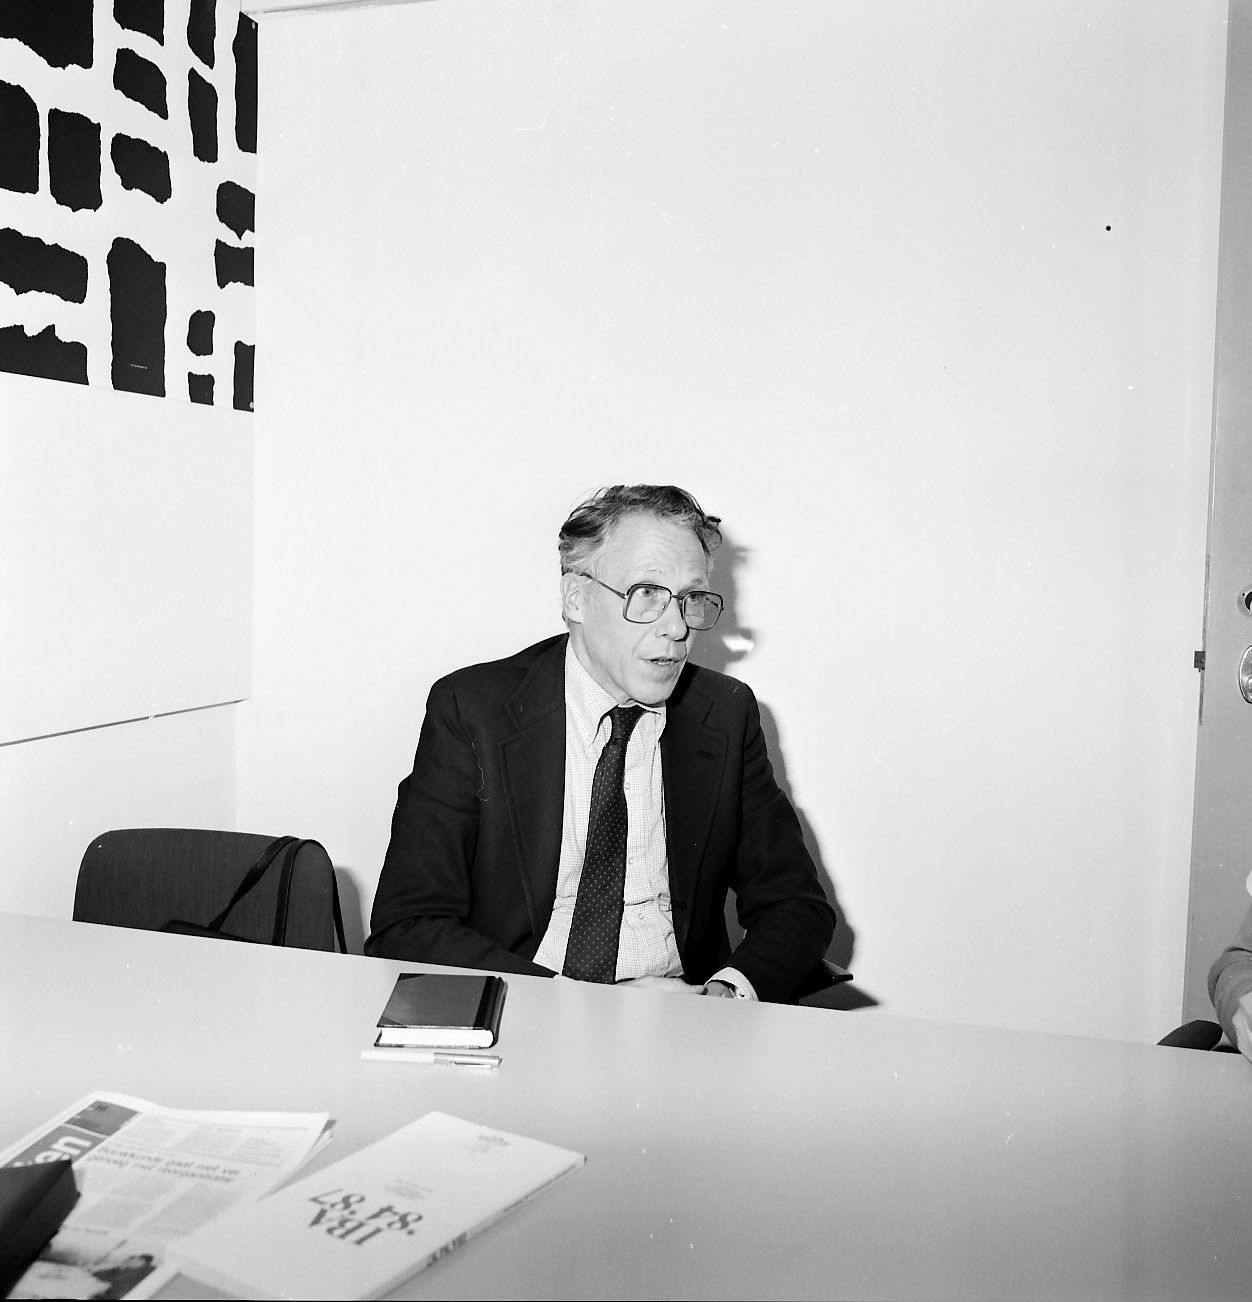 Black and white portrait of John Habraken behind a desk in an office, probably at TU Eindhoven.